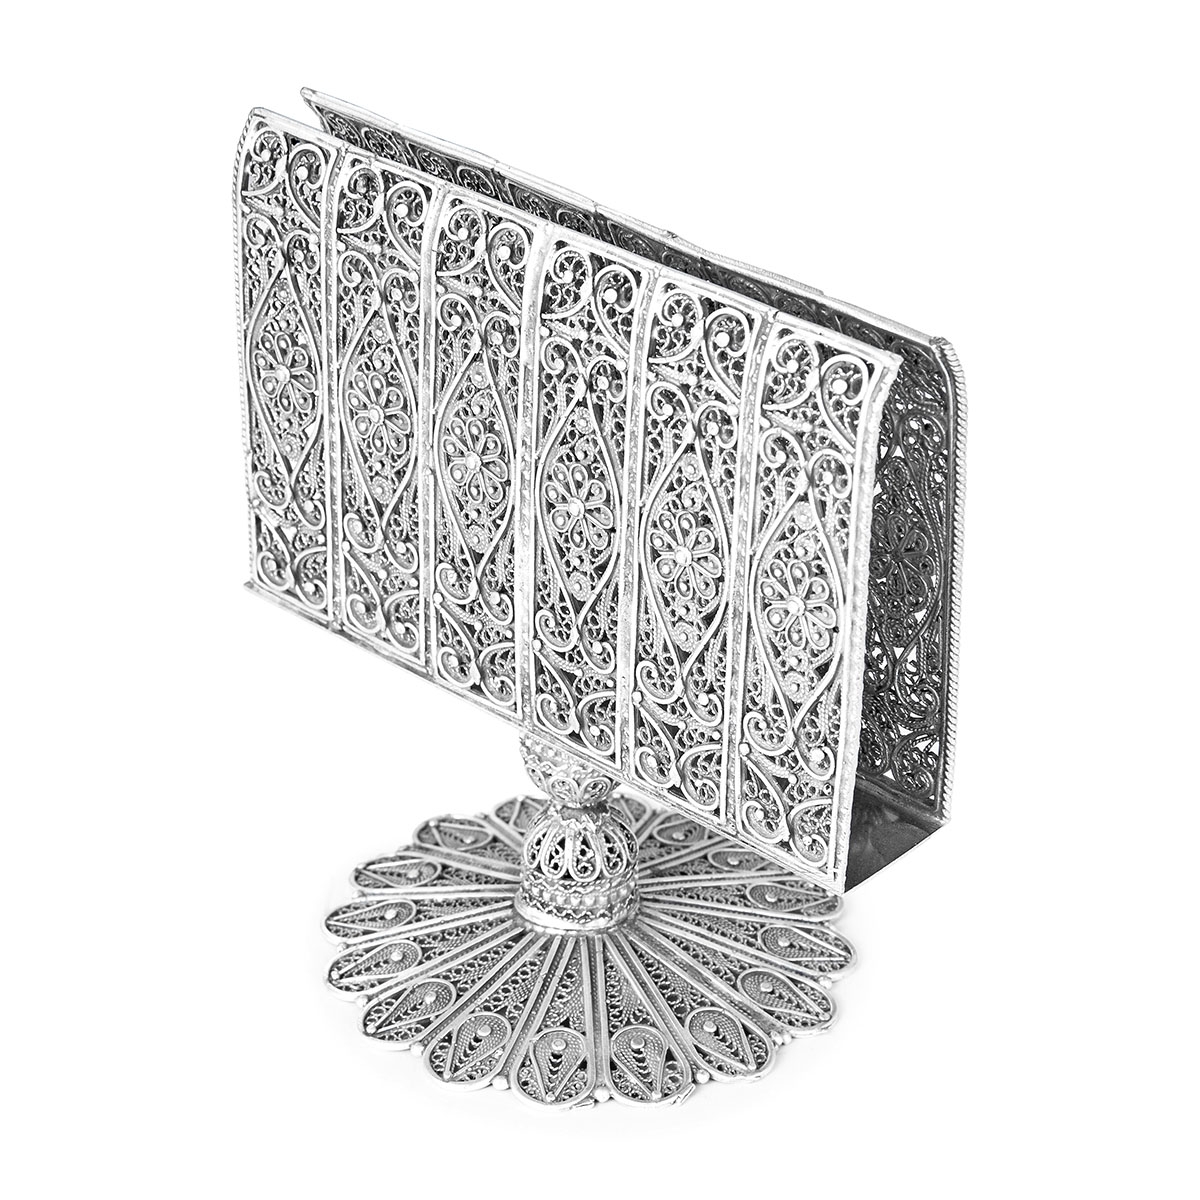 Traditional Yemenite Art Handcrafted Sterling Silver Standing Matchbox Holder With Filigree Design - 1